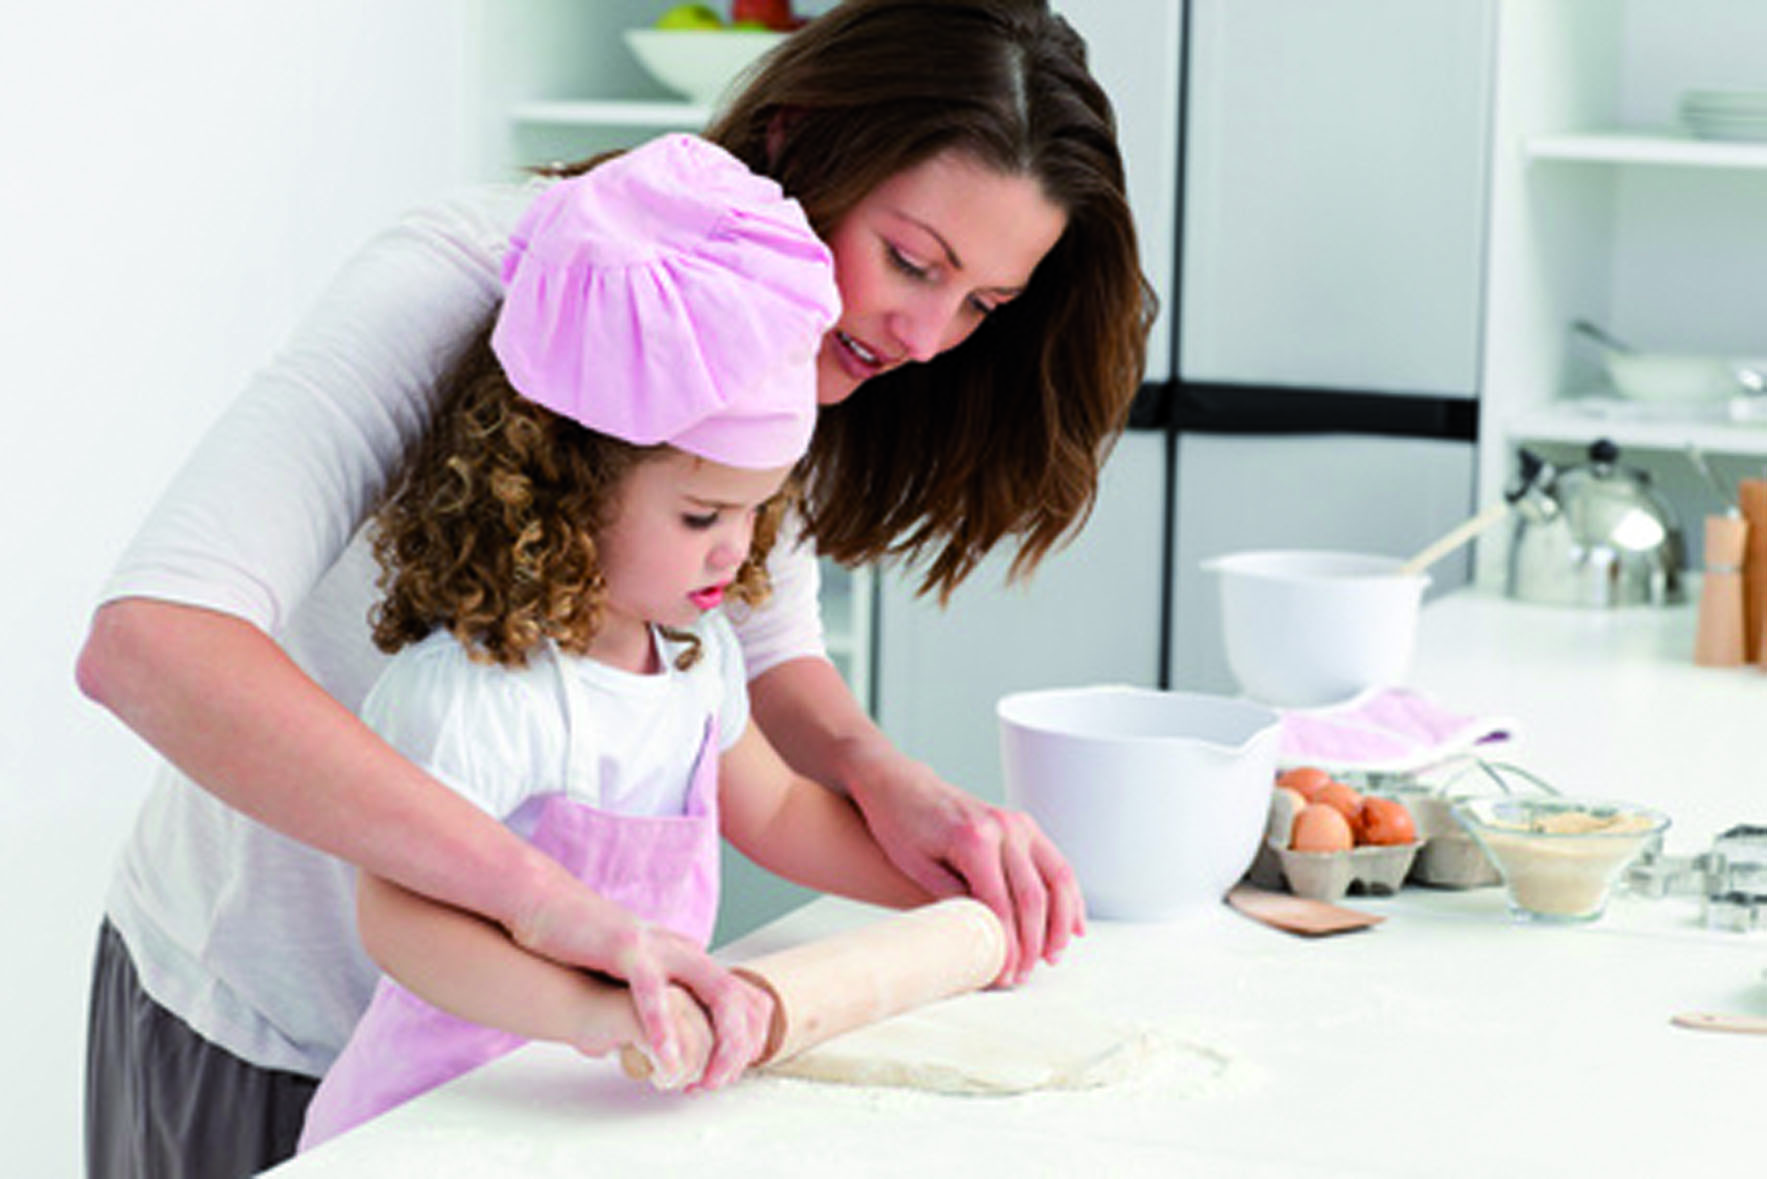 Mother and daughter using a rolling pin together in the kitchen